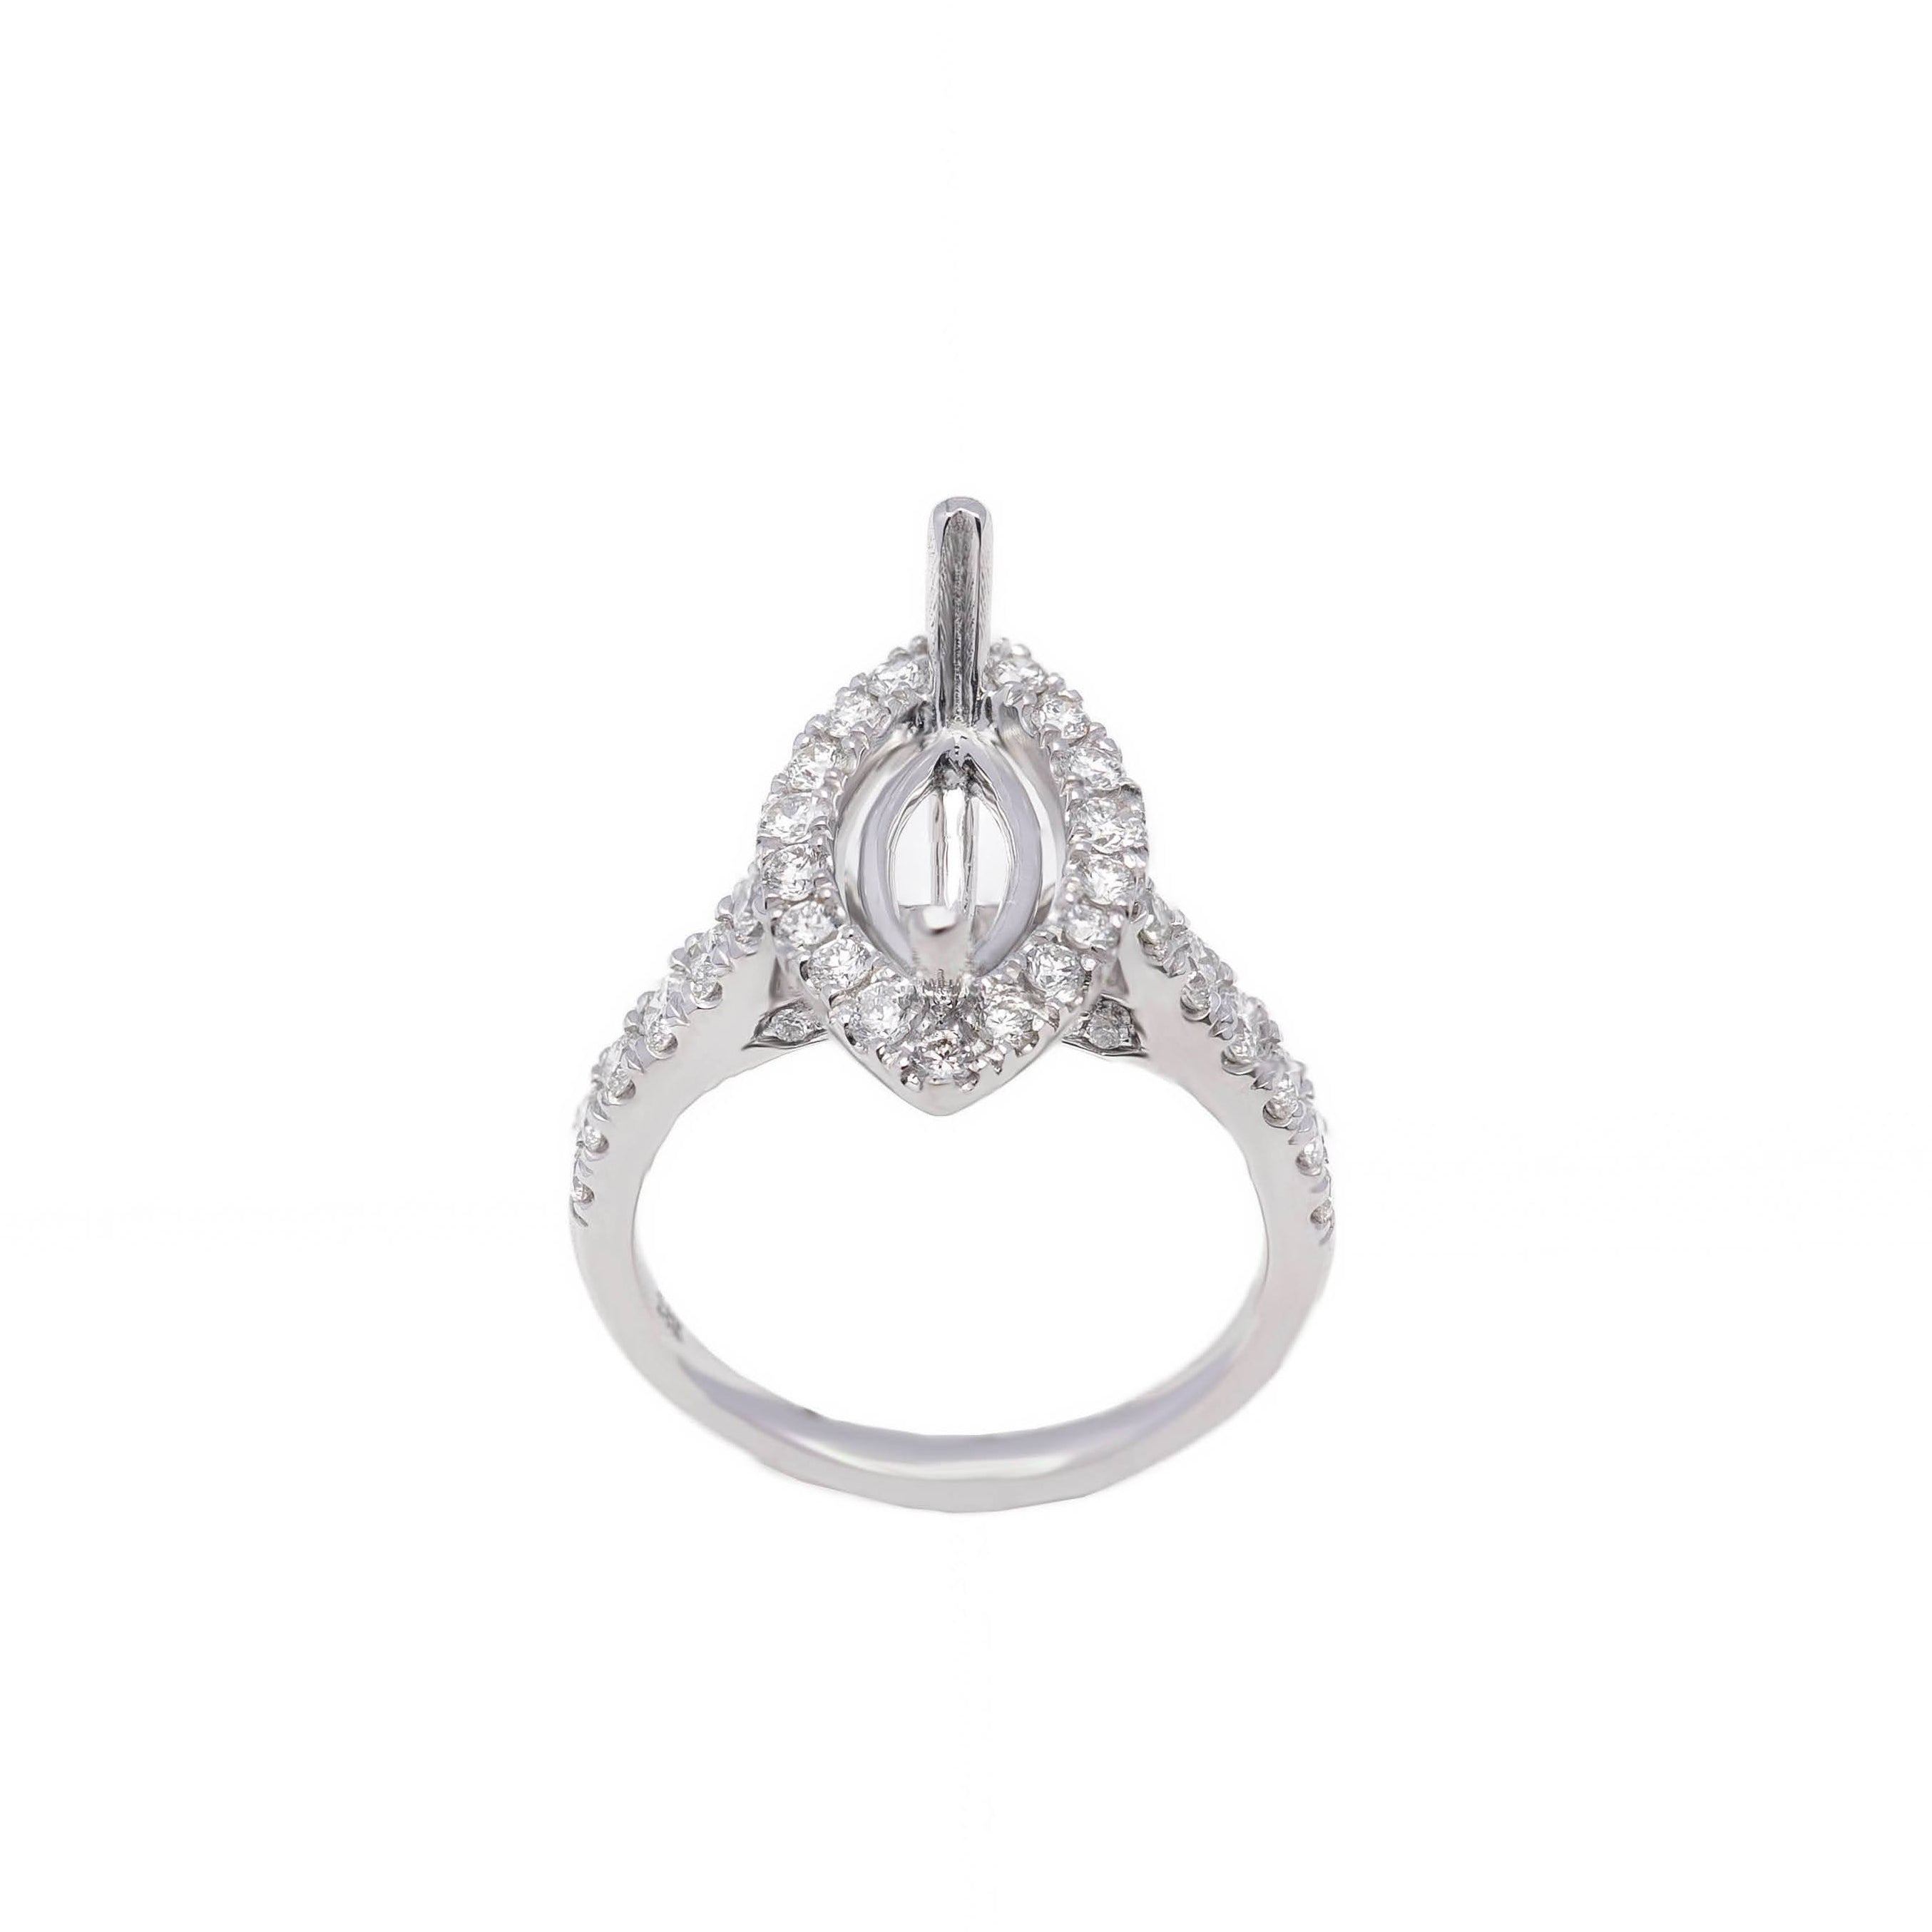 Sophisticated Marquise Illusion Diamond Ring